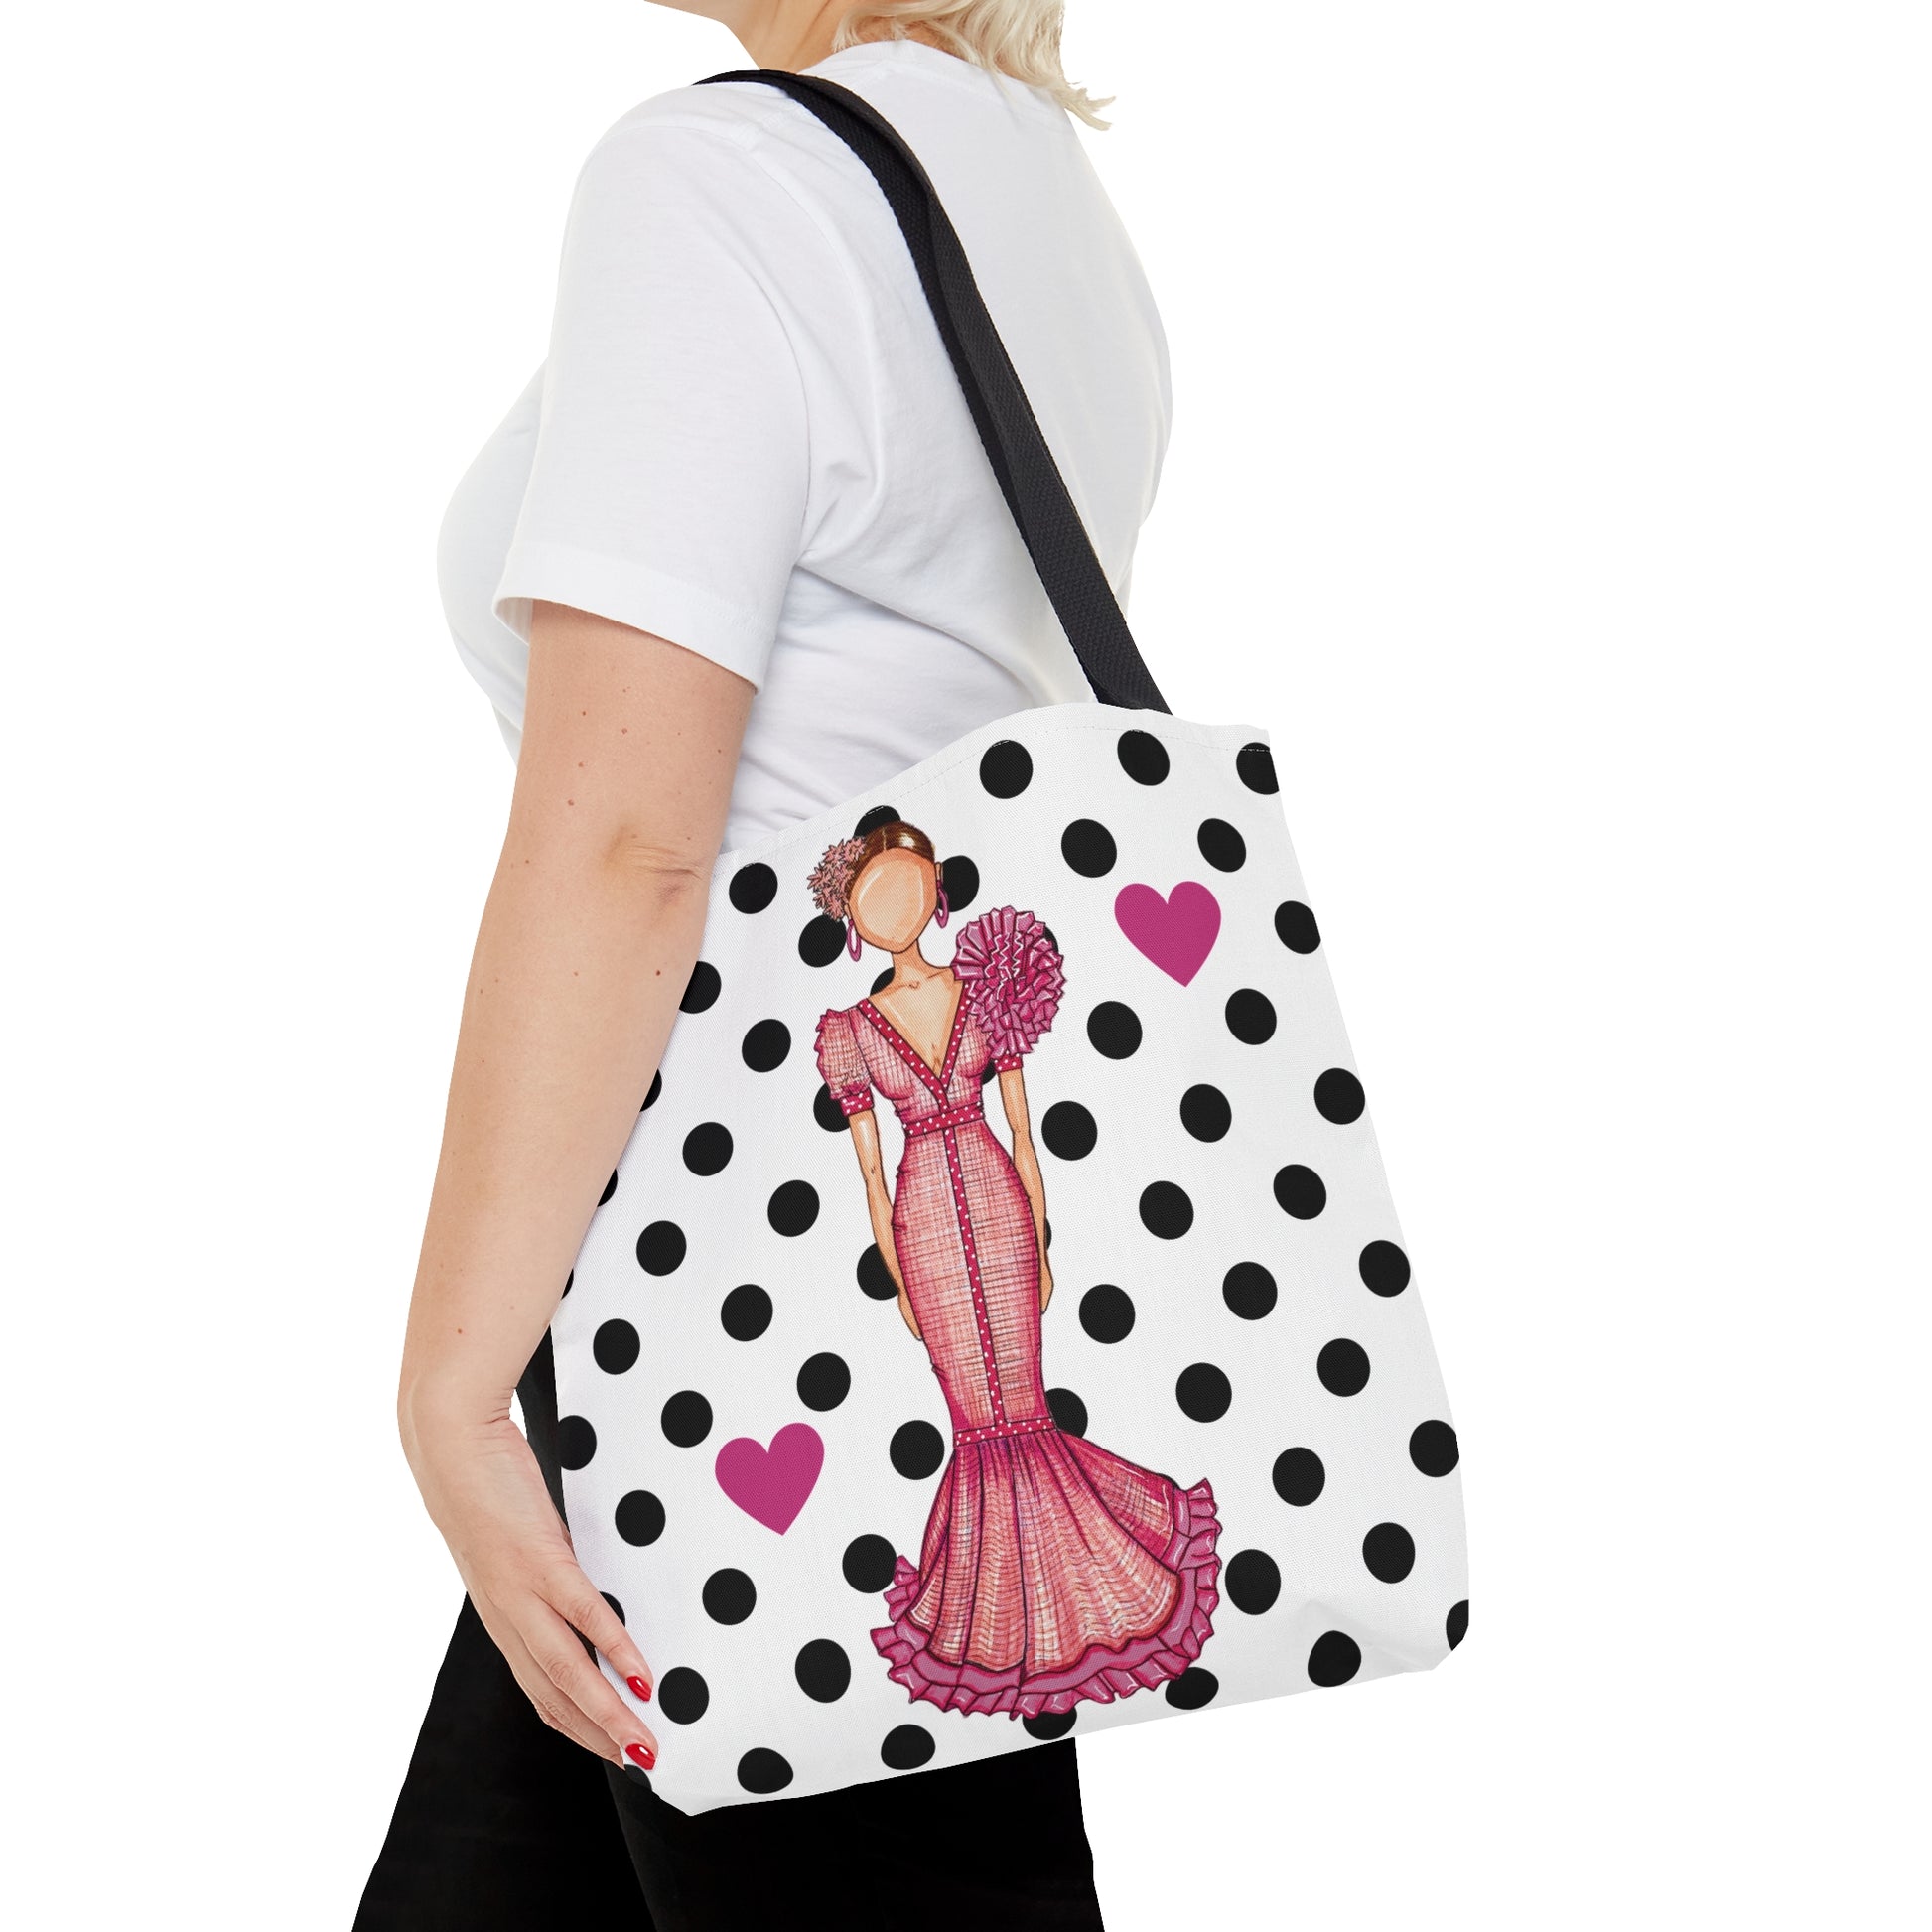 a woman is carrying a polka dot purse